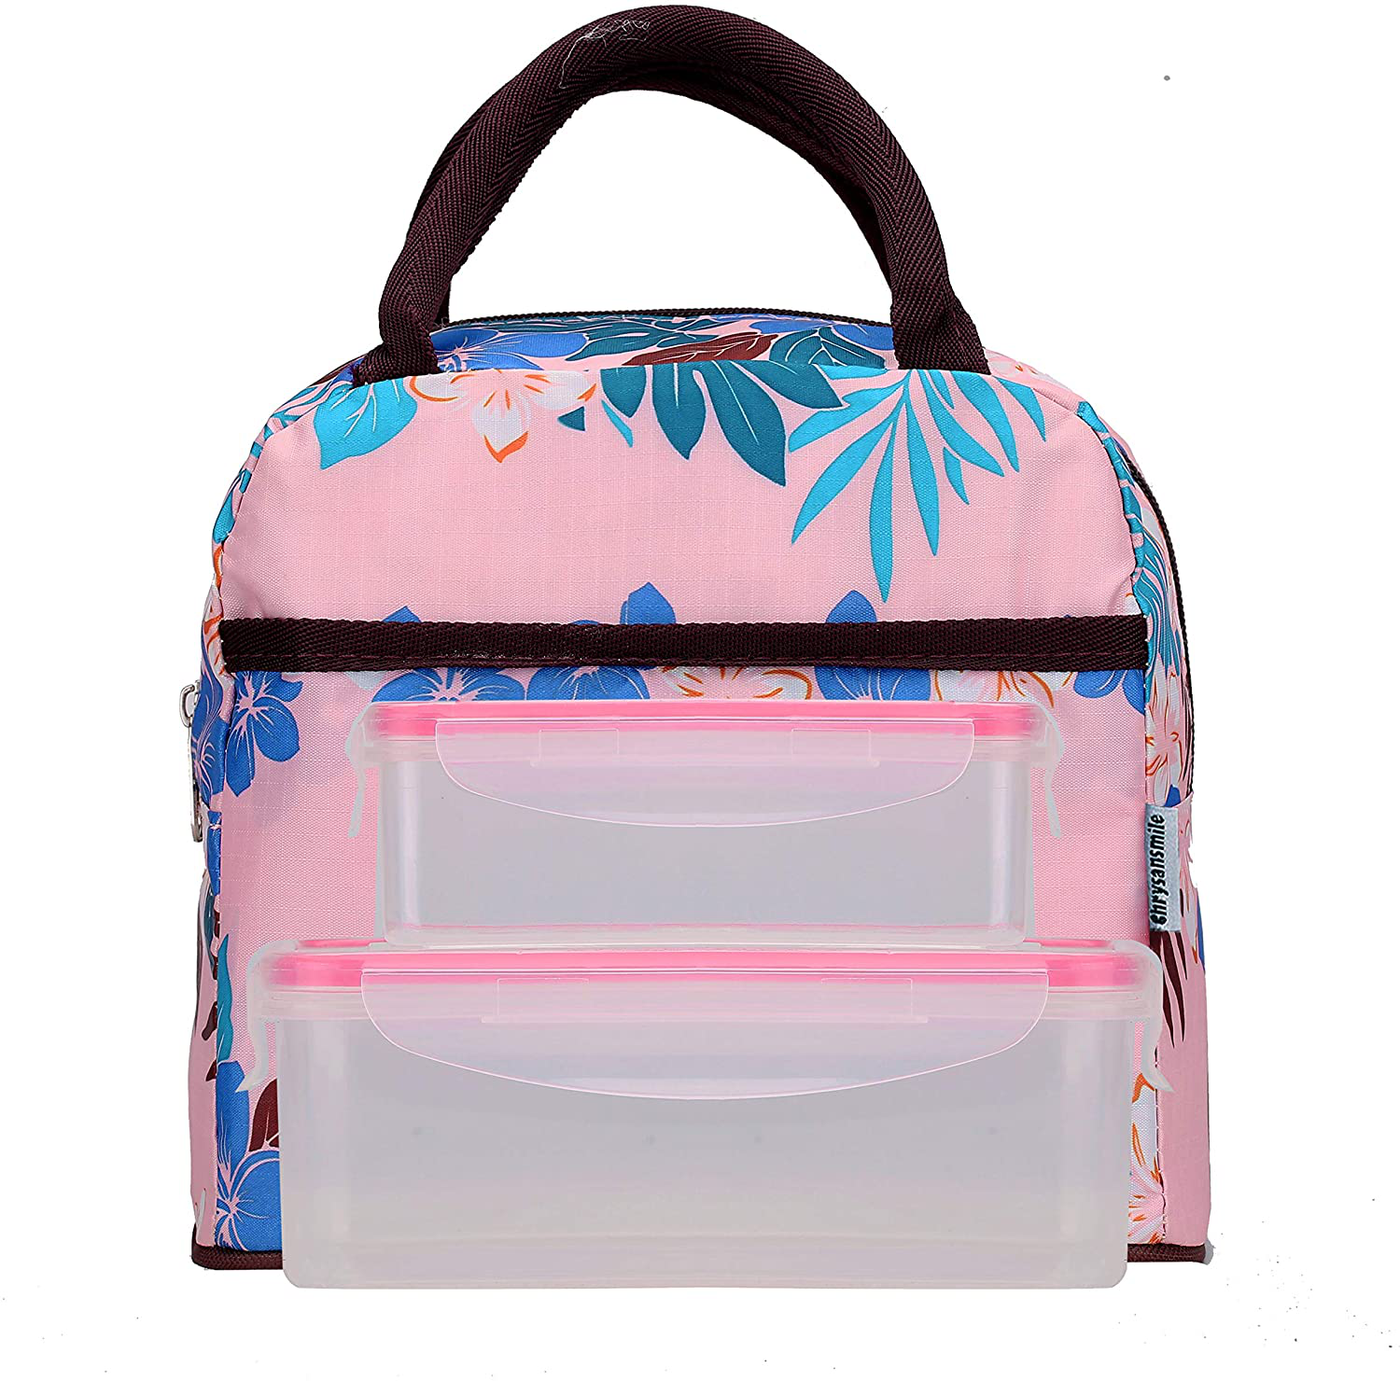 Small Insulated Lunch Bags For Women Girls Cooler Lunch Boxes For Teen Cute Resable Lunch Tote Bag For Picnic School Office Outdoor - White Flower